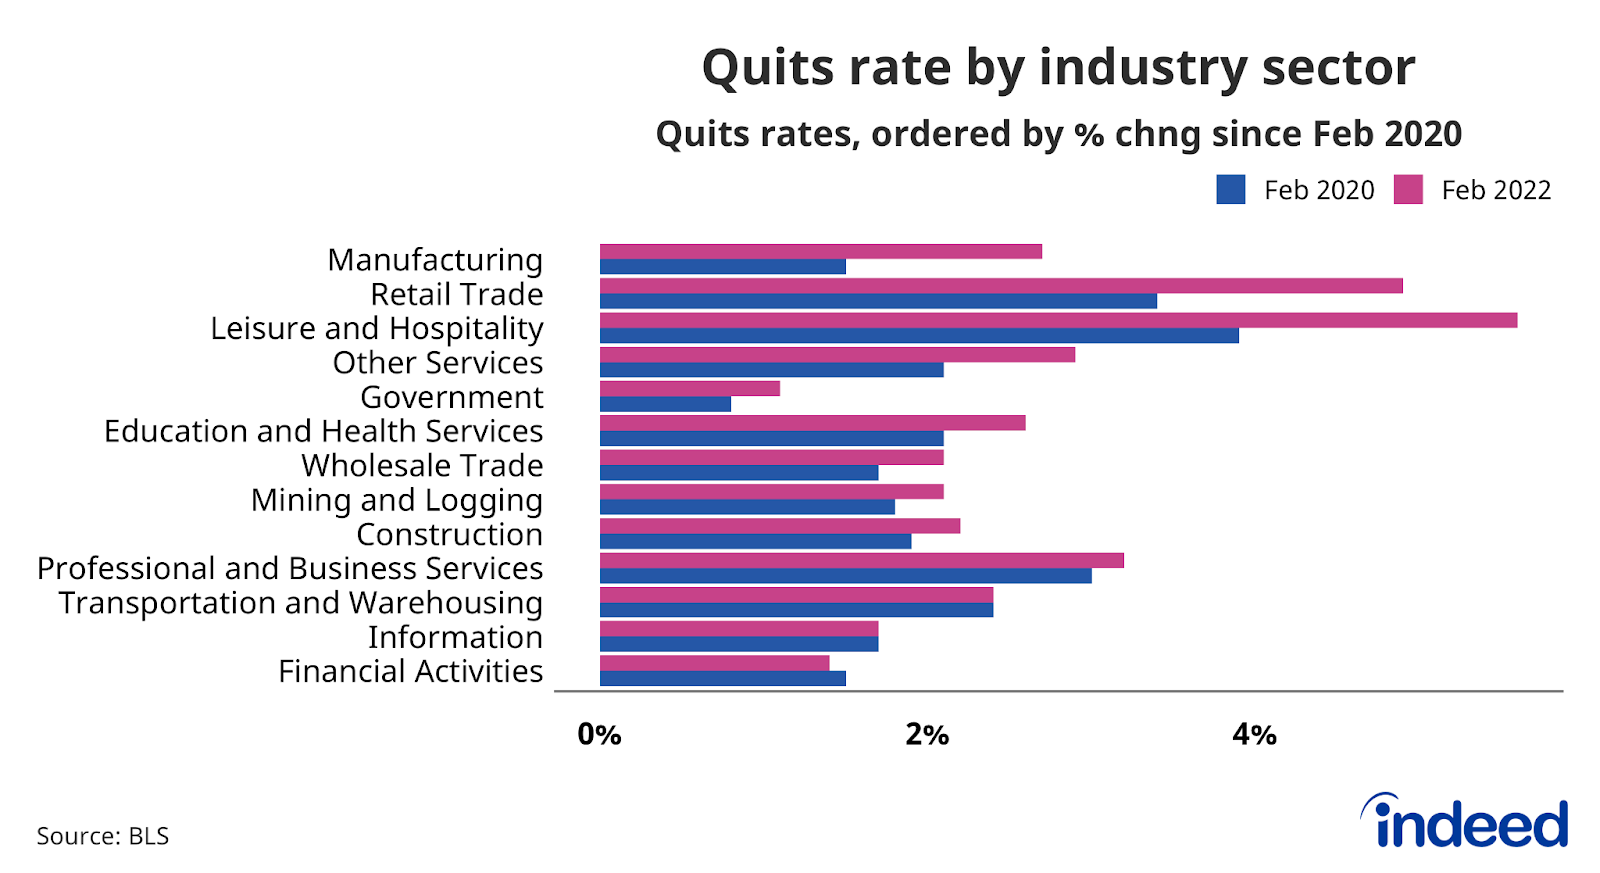 Bar graph titled “Quits rate by industry sector” 